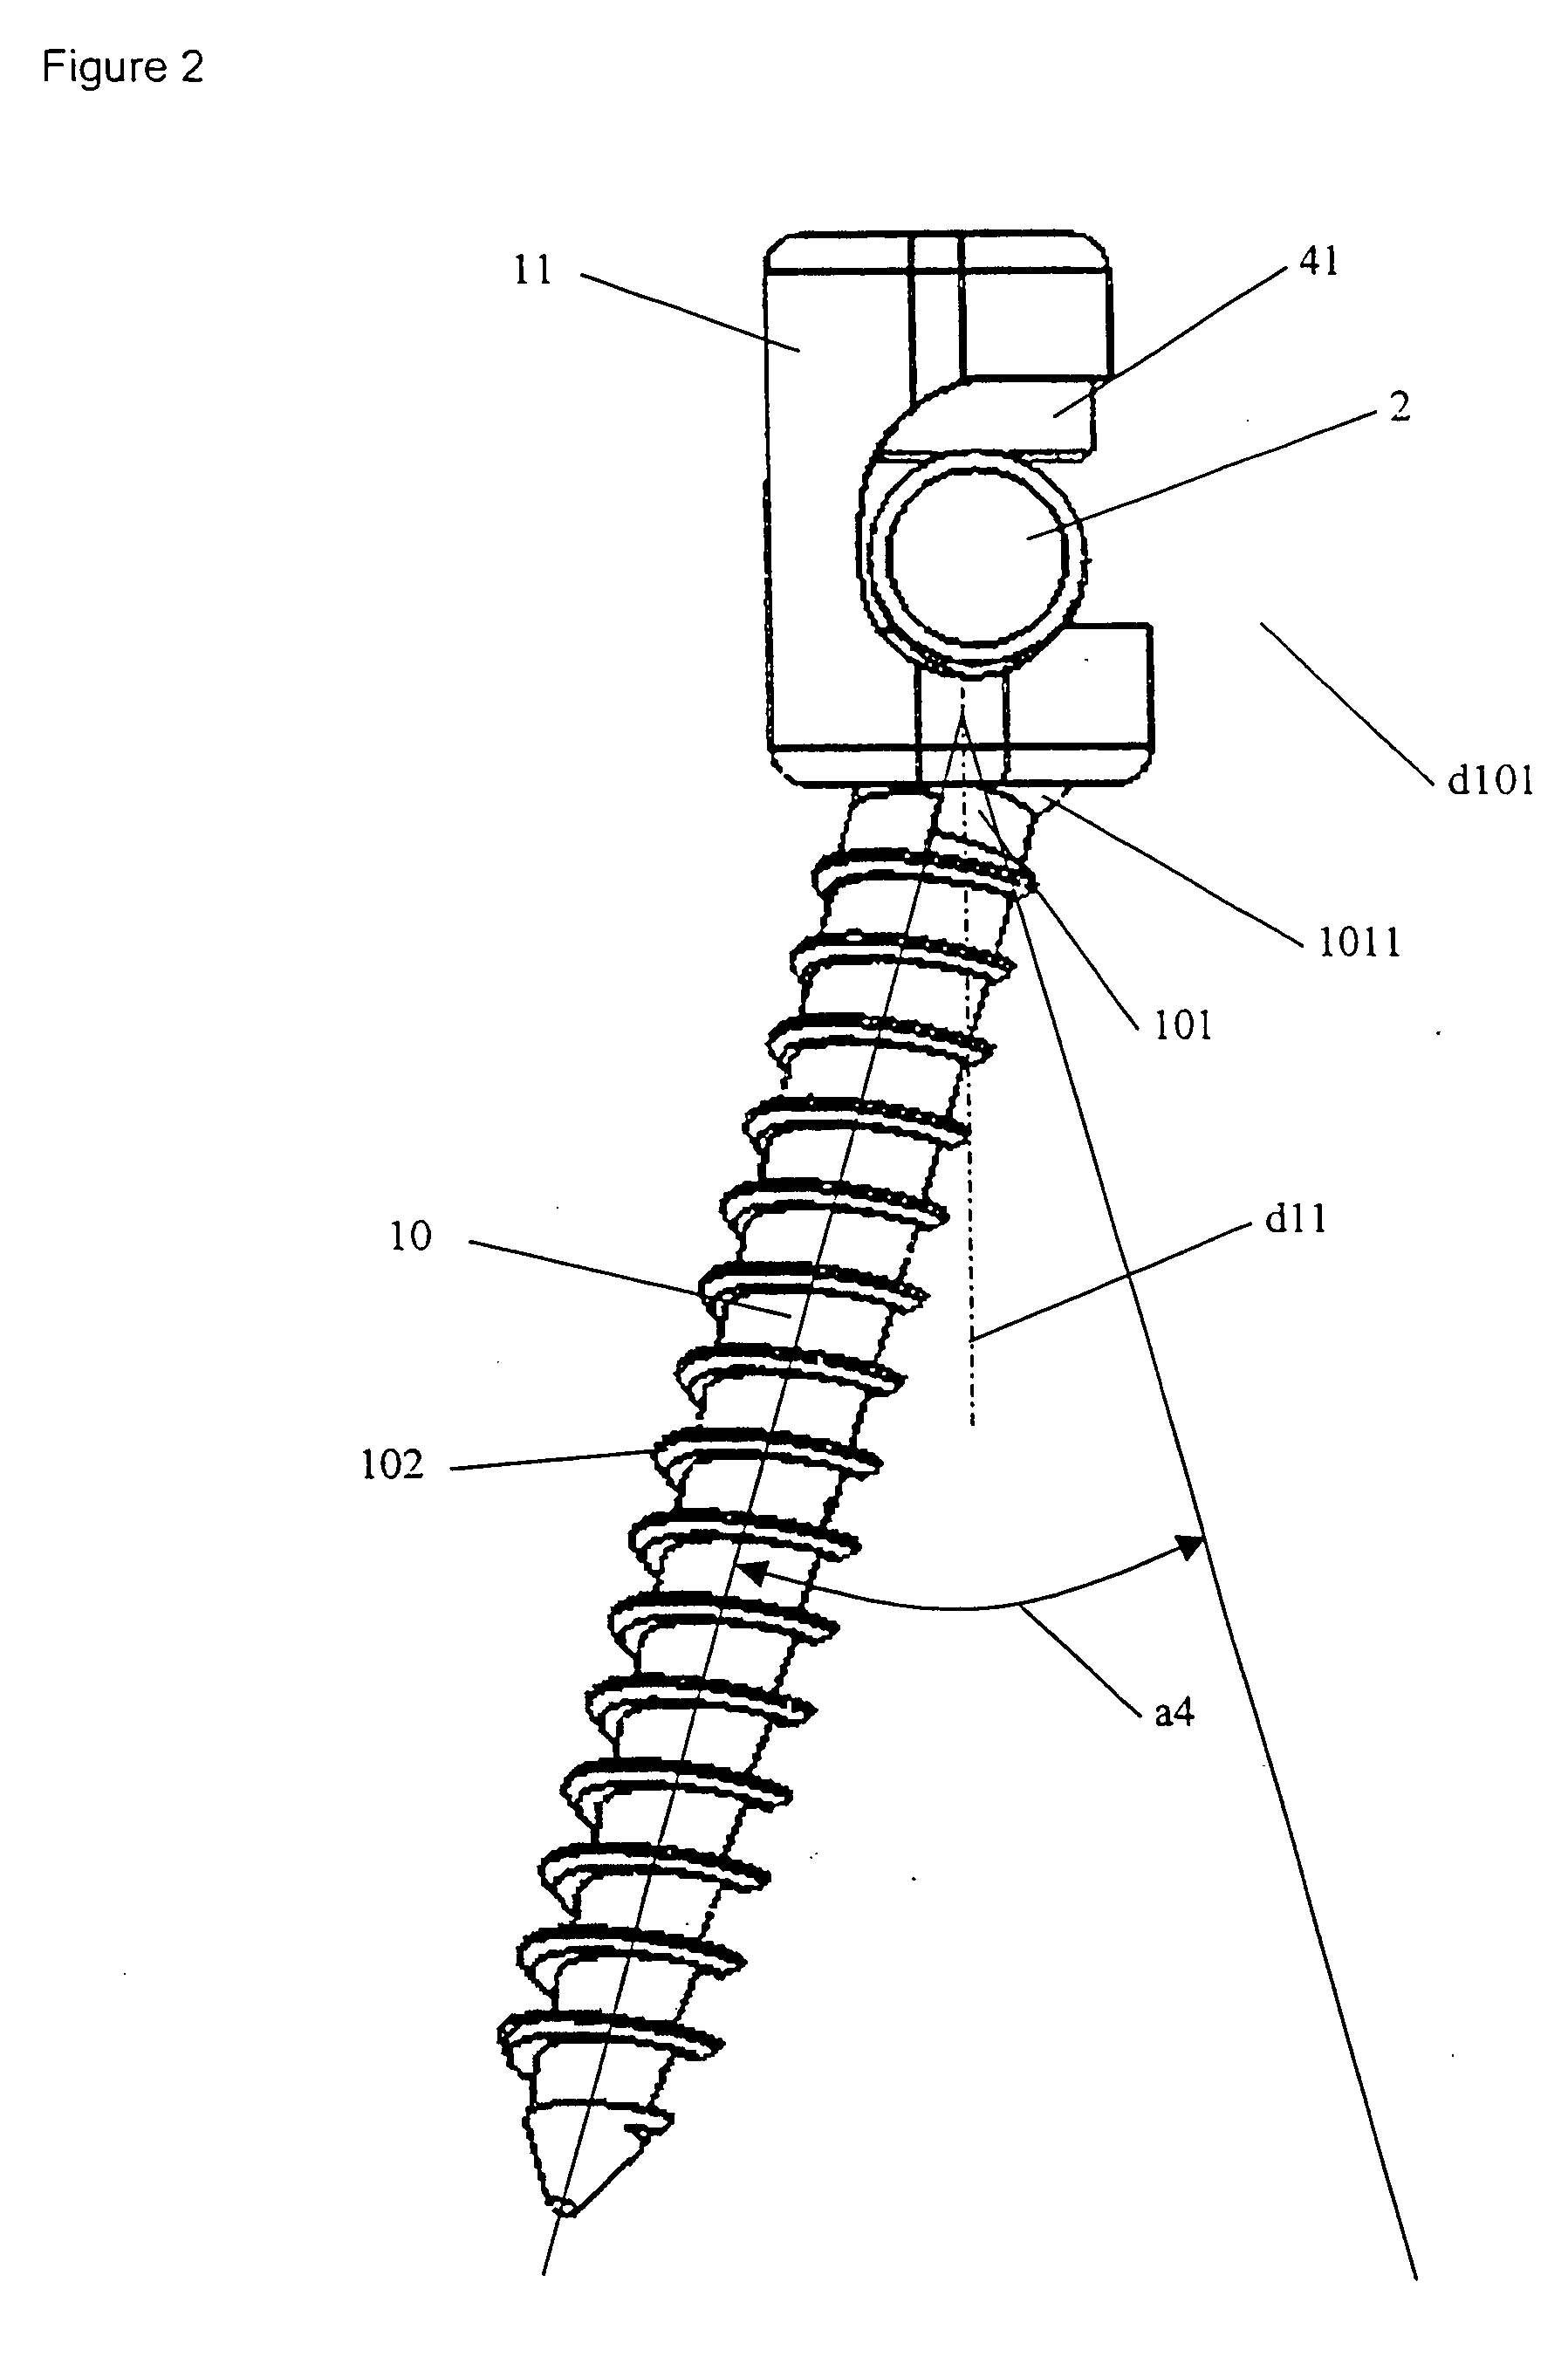 Implant for osseous anchoring with polyaxial head